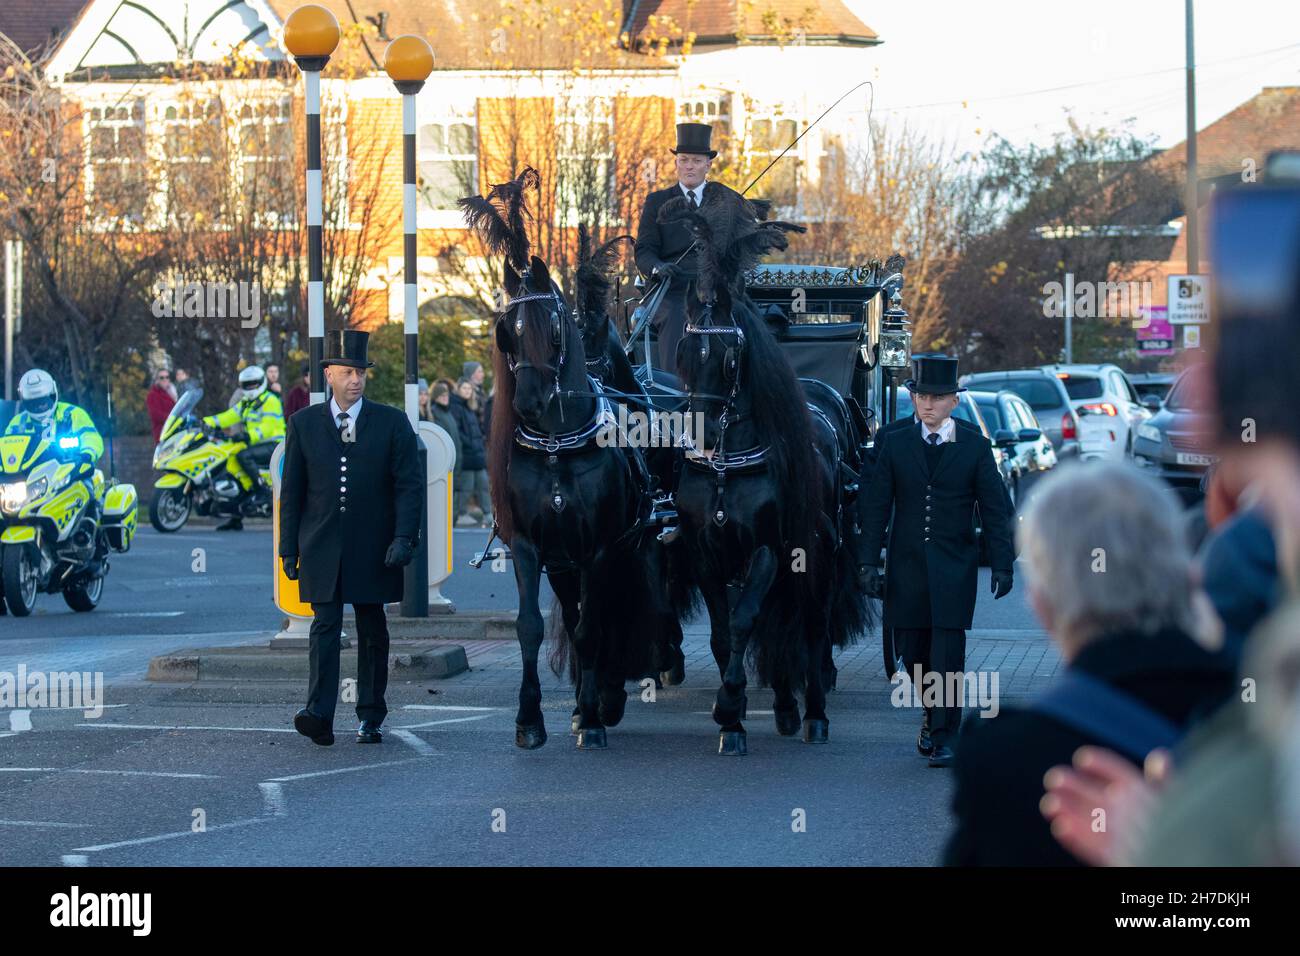 SOUTHEND, ENGLAND, NOVEMBER 22ND 2021, Members of the public align the streets outside Southend West Conservative Association's Iveagh Hall to pay their respects as a horse-drawn hearse carrying the coffin of murdered Southend West MP Sir David Amess stops as a part of it procession. Credit: Lucy North/Alamy Live News Stock Photo